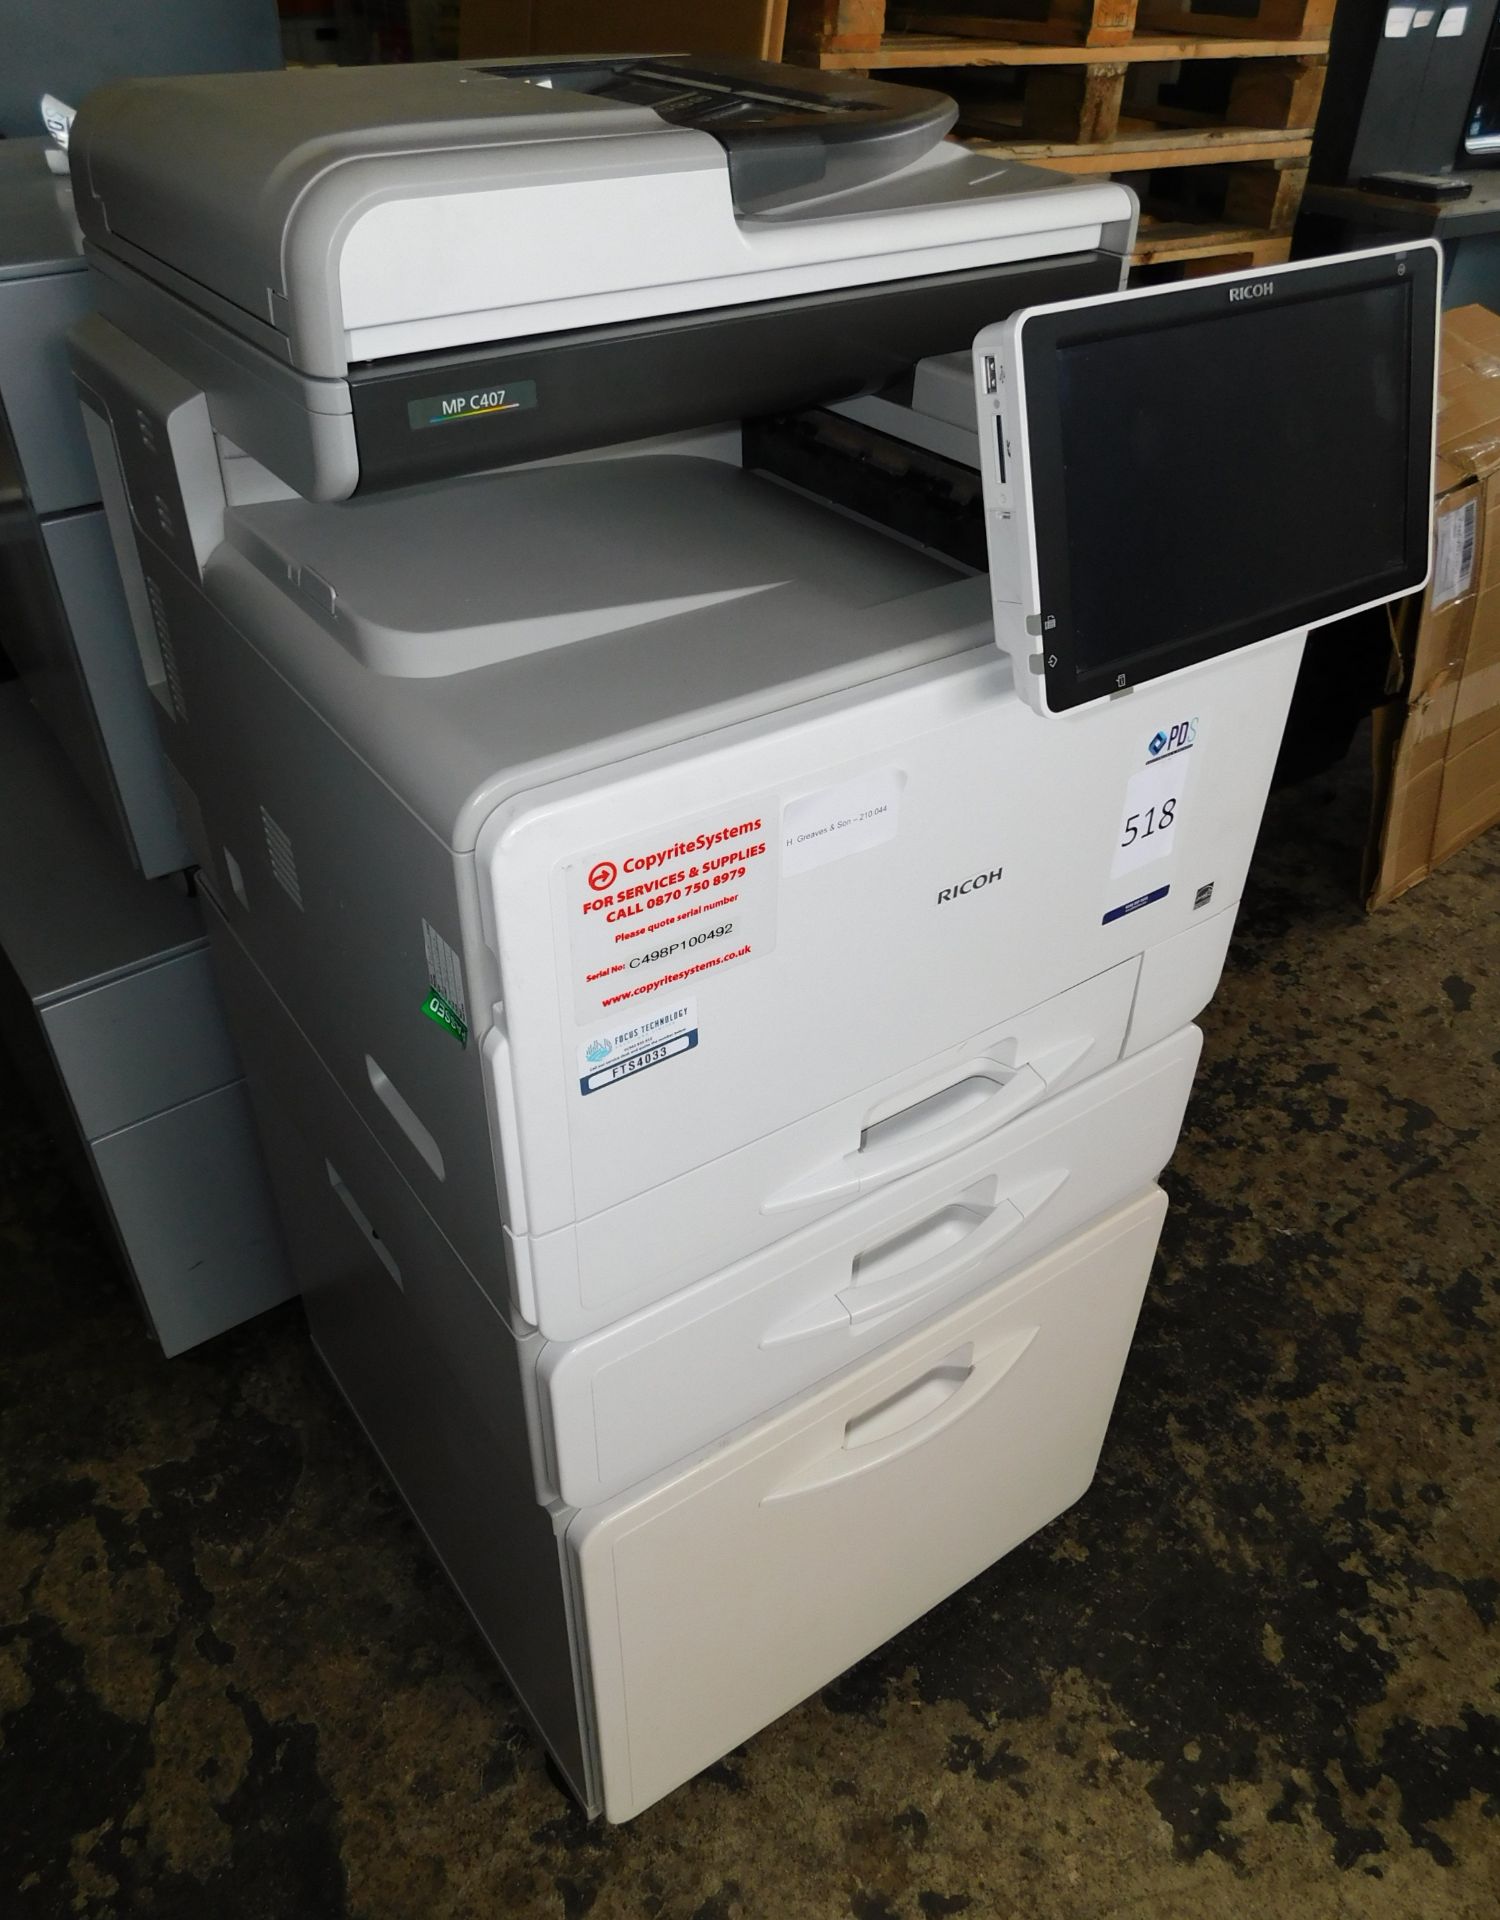 Ricoh MPC407 Print Centre (Location: Stockport. Please Refer to General Notes)